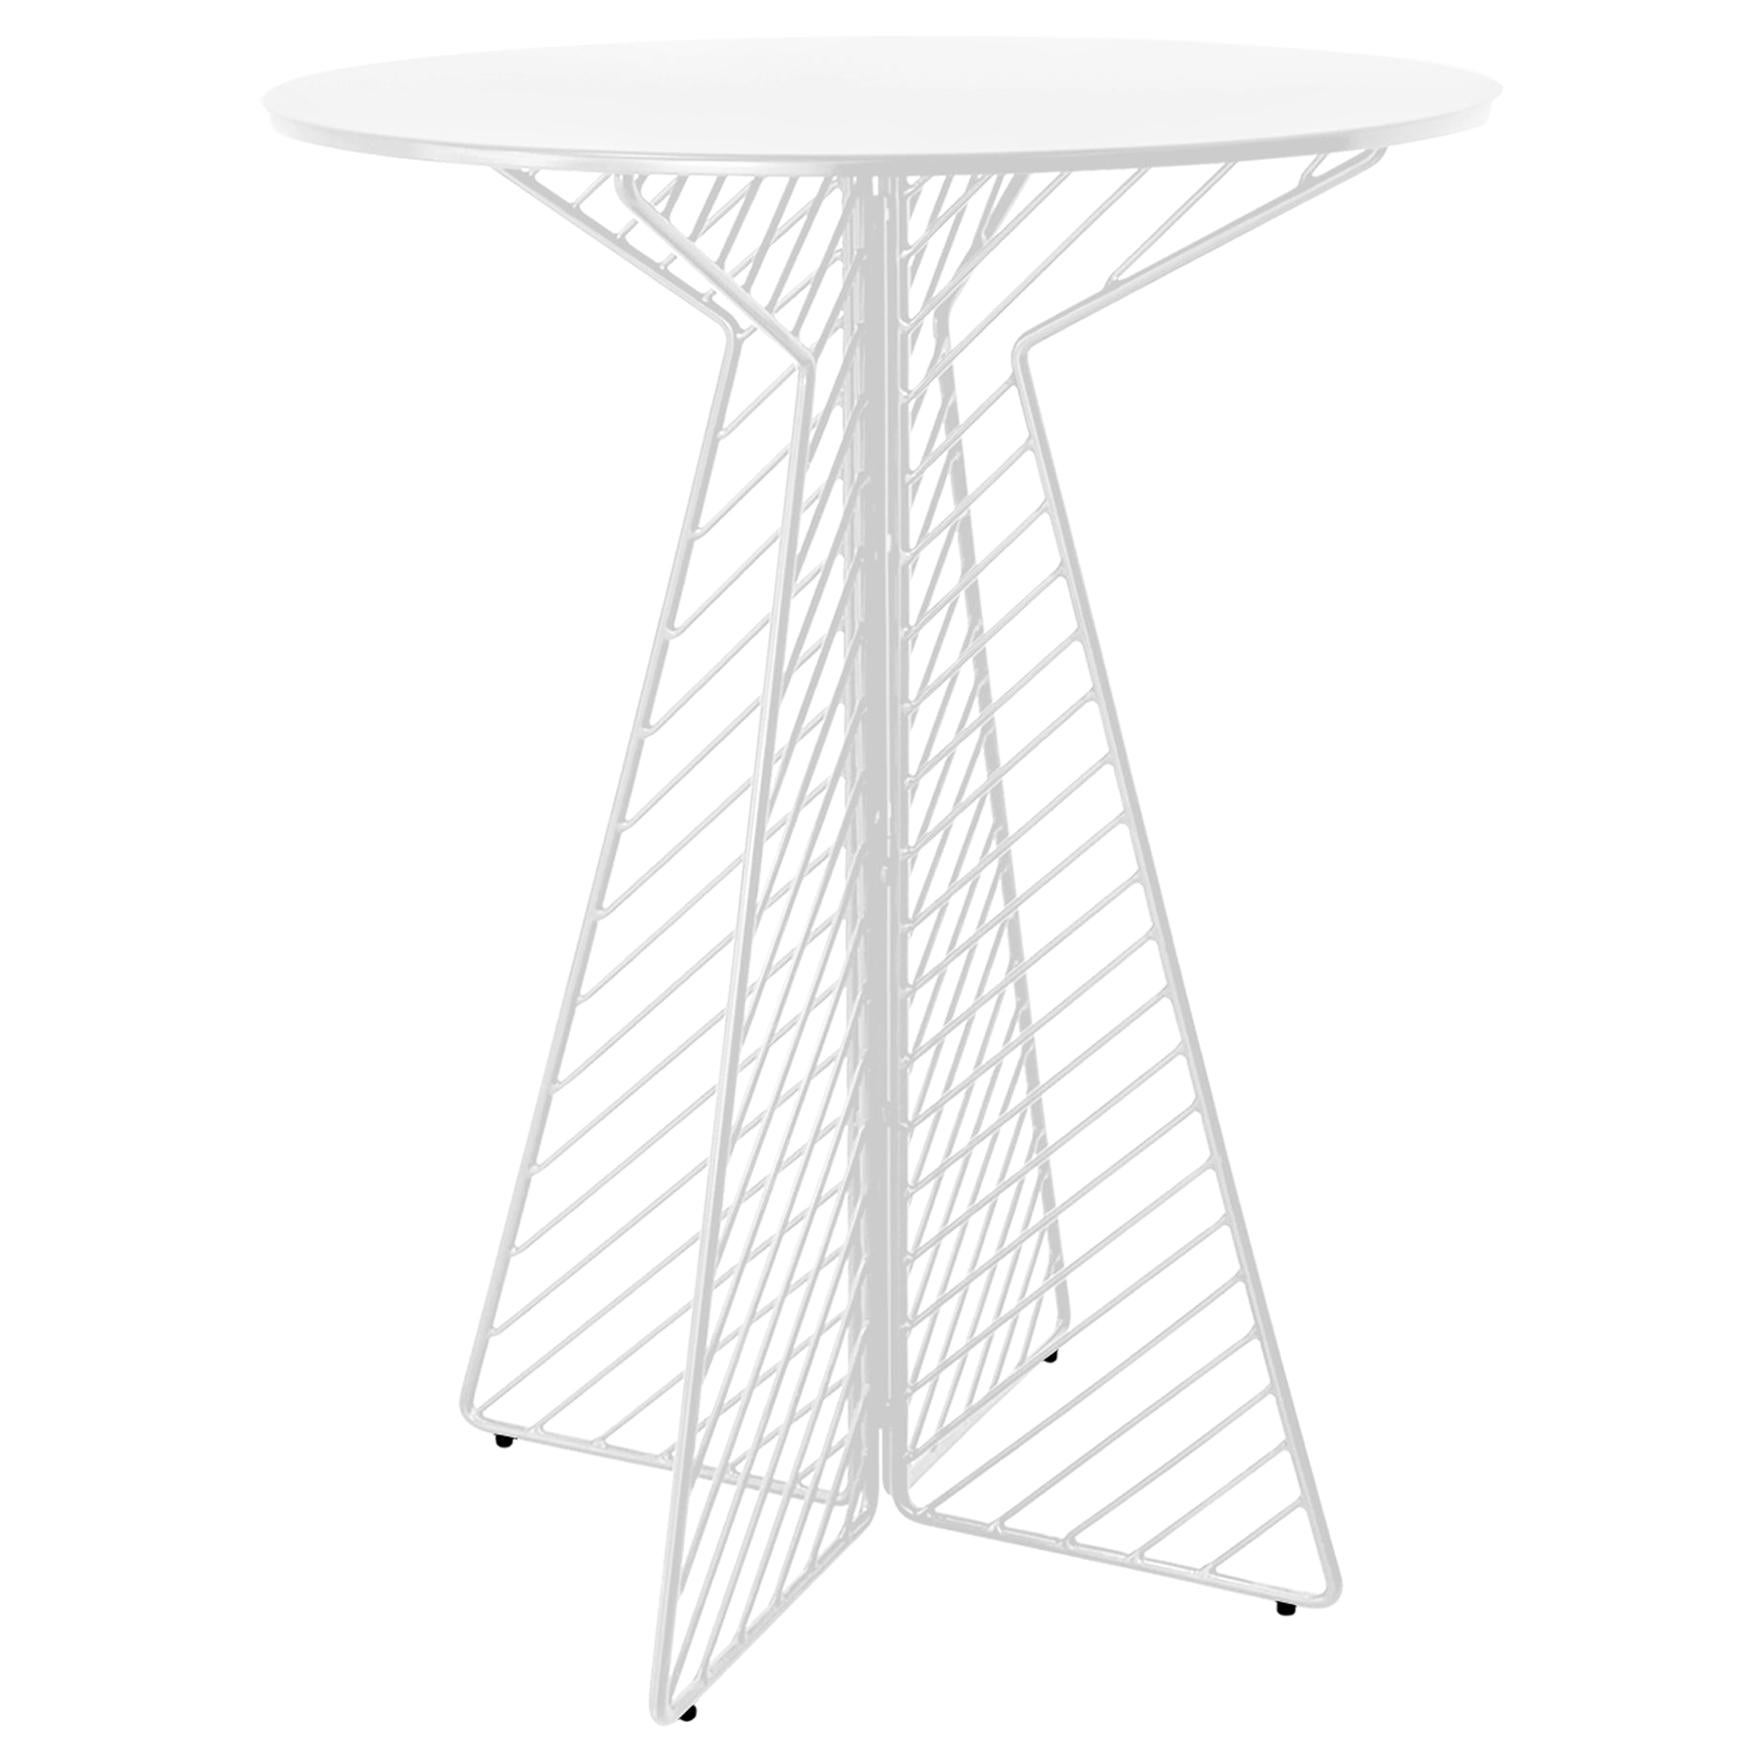 Minimalist Bar Table, Flat Pack Wire Cafe Bar Table in White by Bend Goods